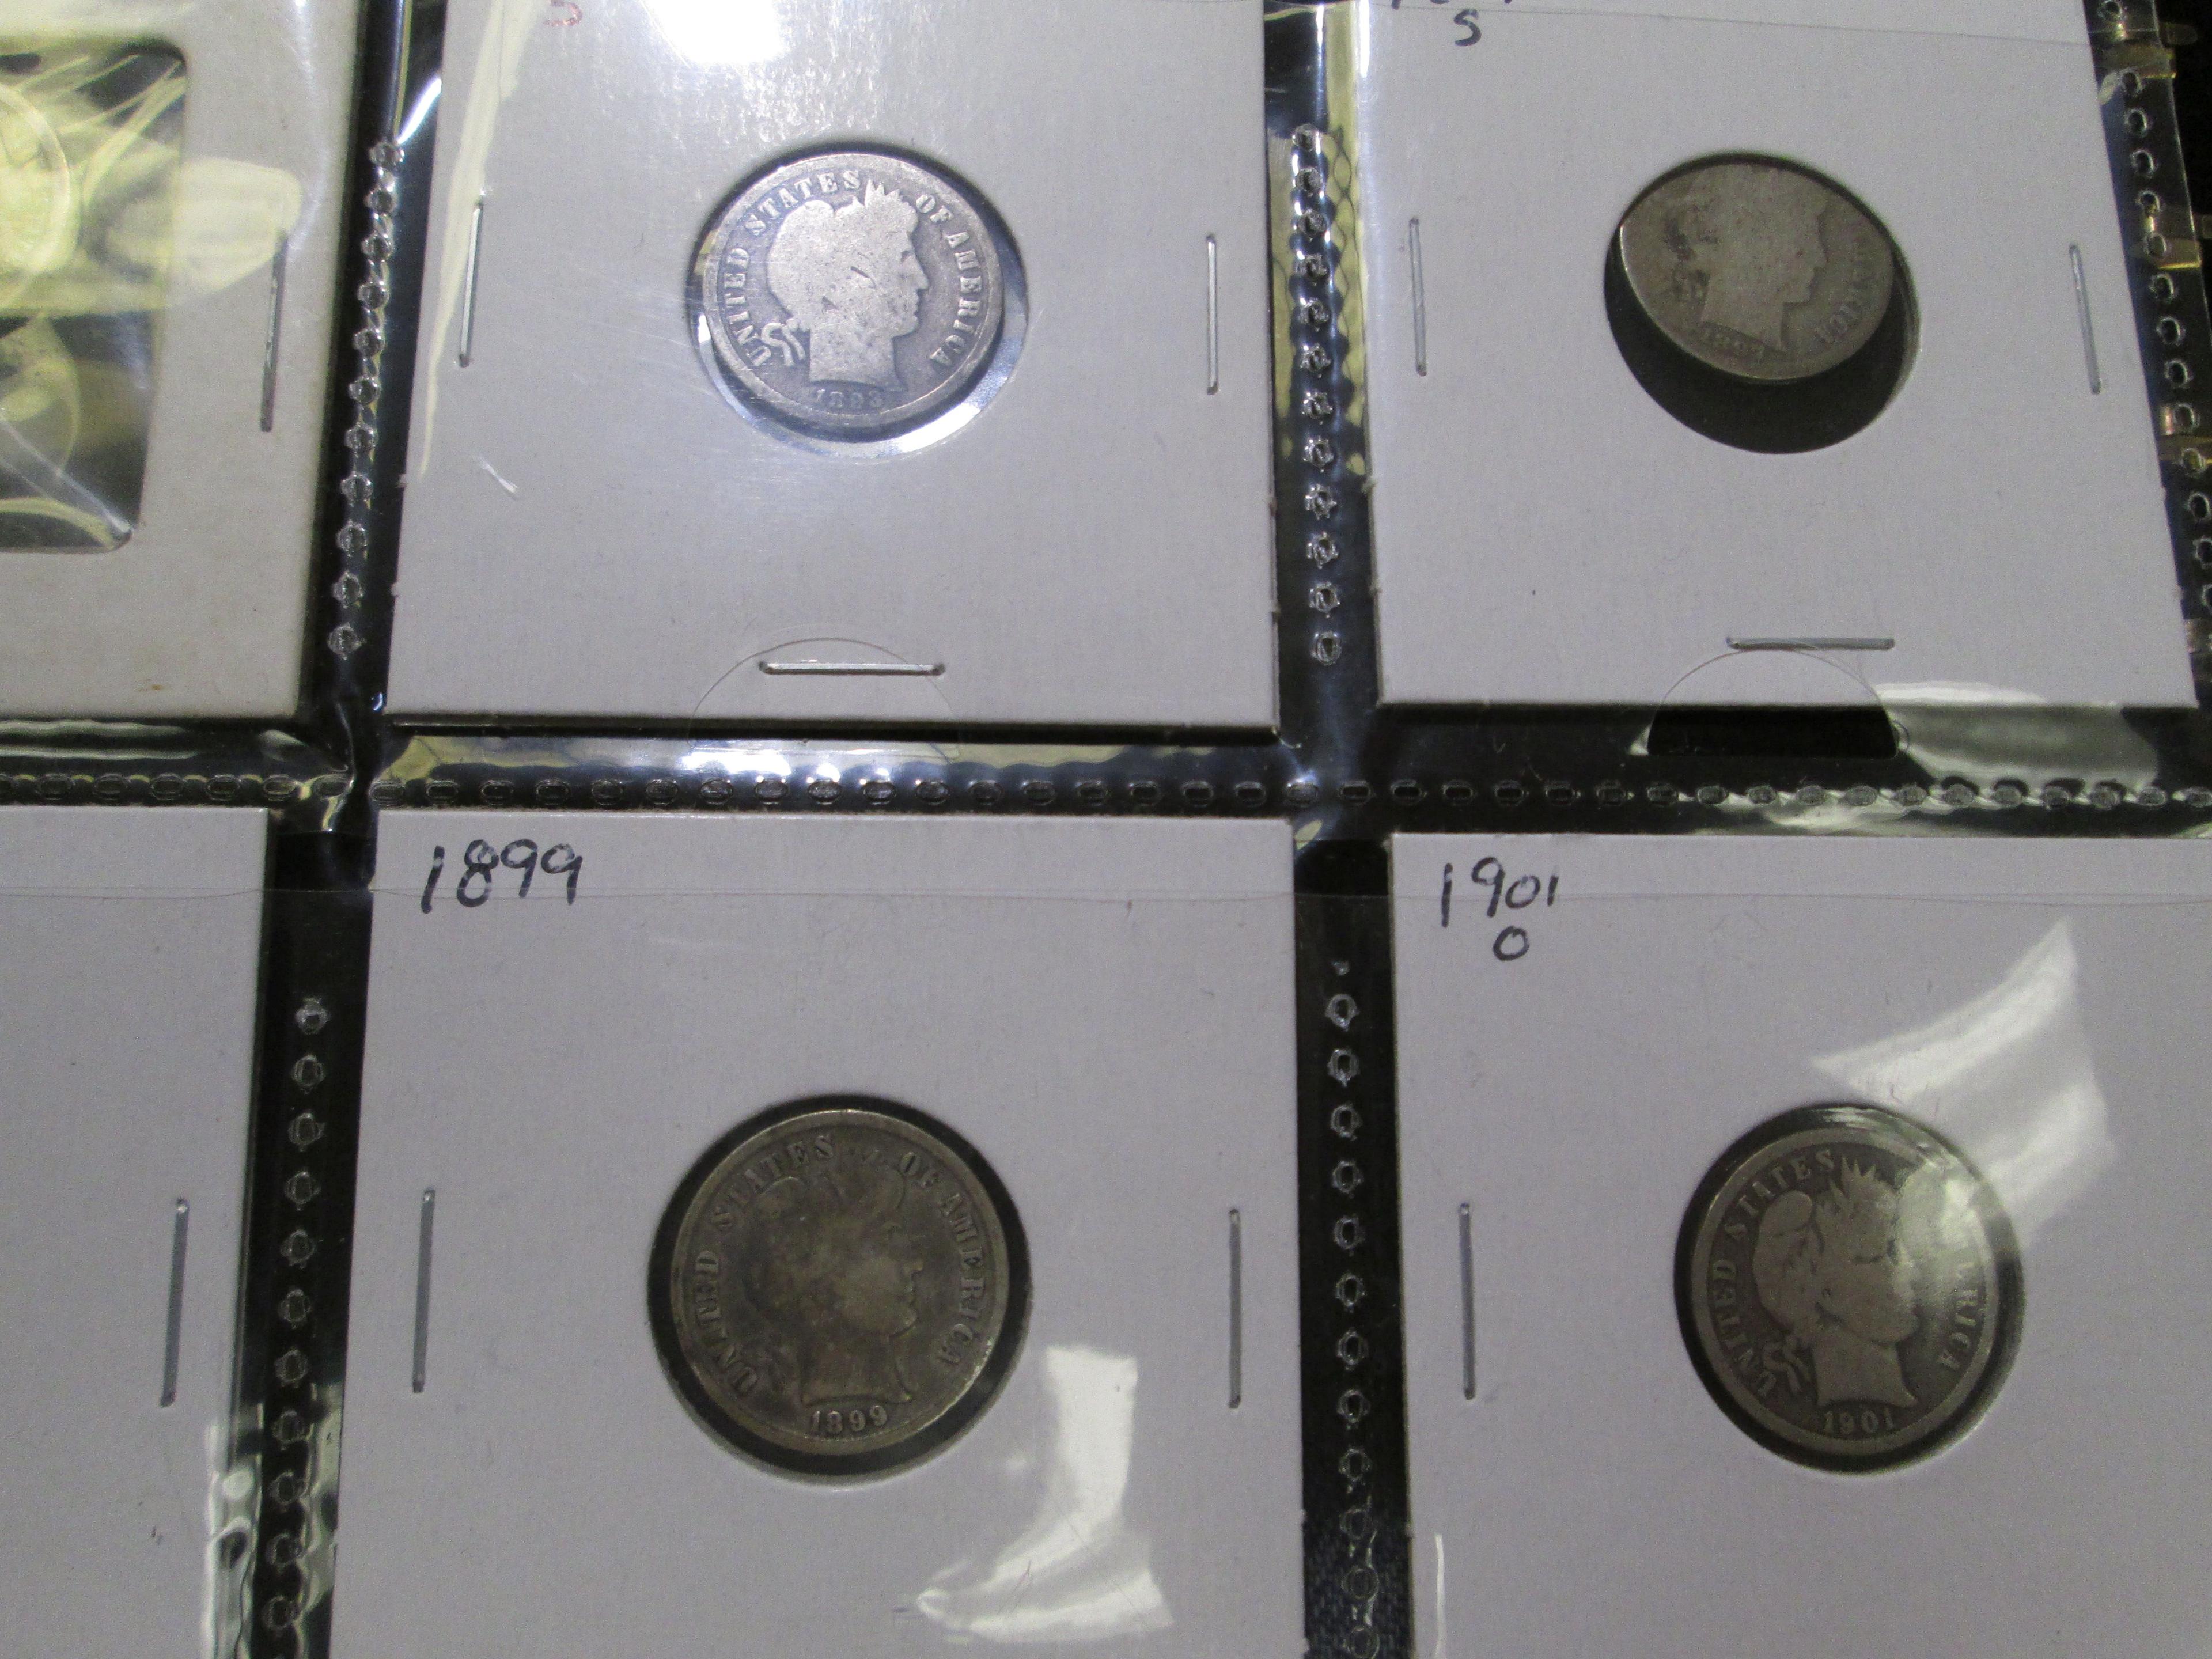 Plastic page of U.S. Type Coins. Includes (6) Barber Dimes, (2) Seated Liberty Dimes, (3) Buffalo Ni